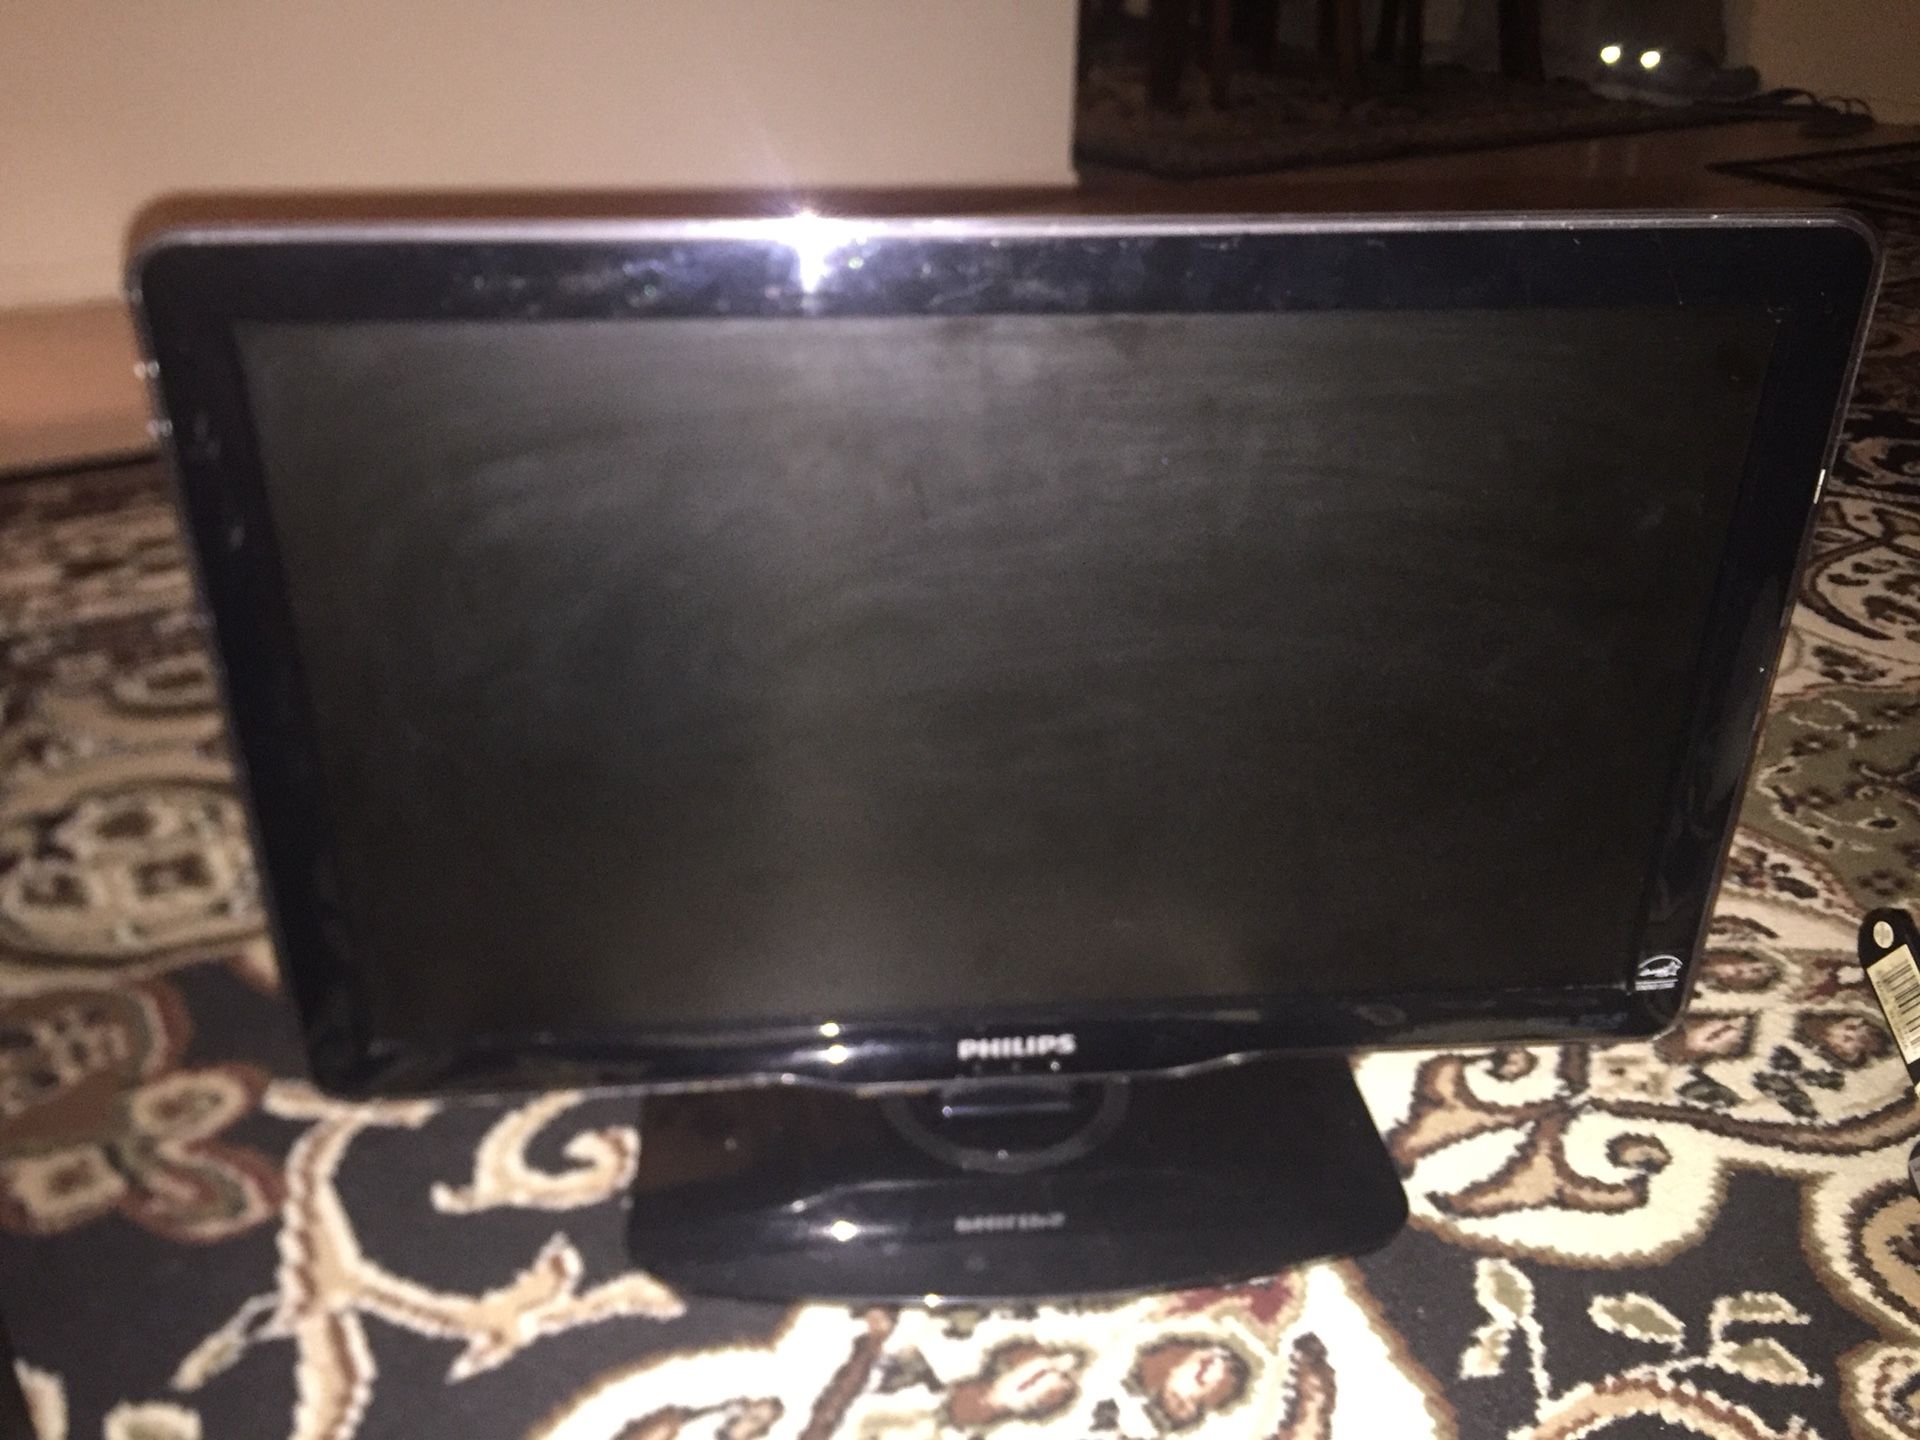 Beautiful gently used Phillips computer monitor or Tv